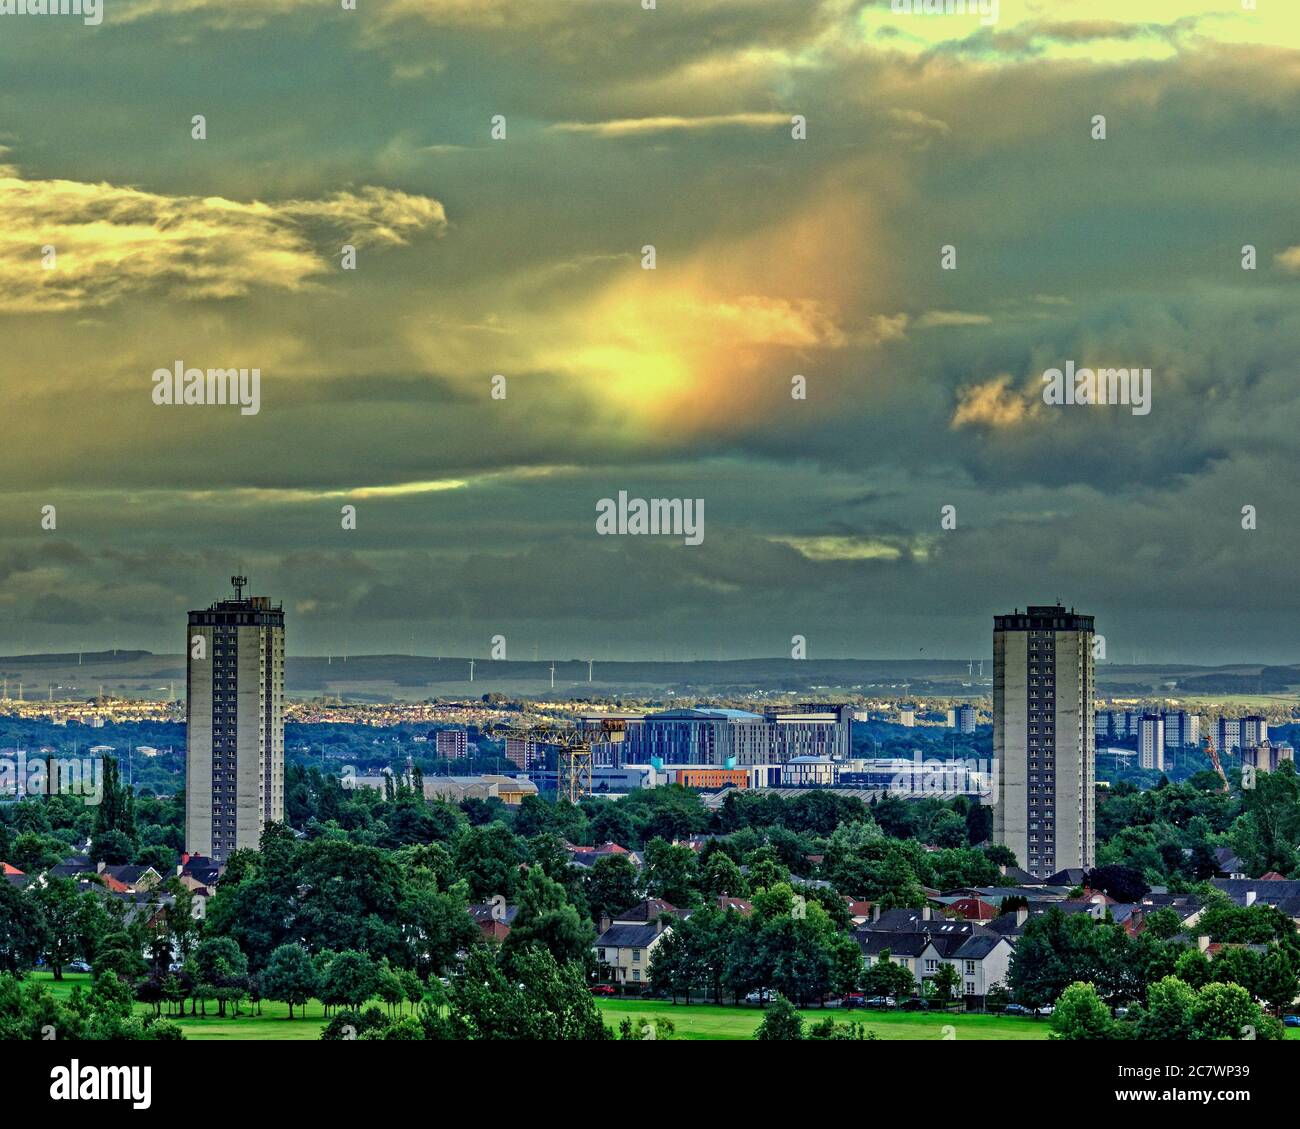 Glasgow, Scotland, UK 19th July, 2020: UK Weather:Rare halo rainbow or rainbow cloud was over the queen Elizabeth teaching hospital in Govan tonight. Credit: Gerard Ferry/Alamy Live News Stock Photo